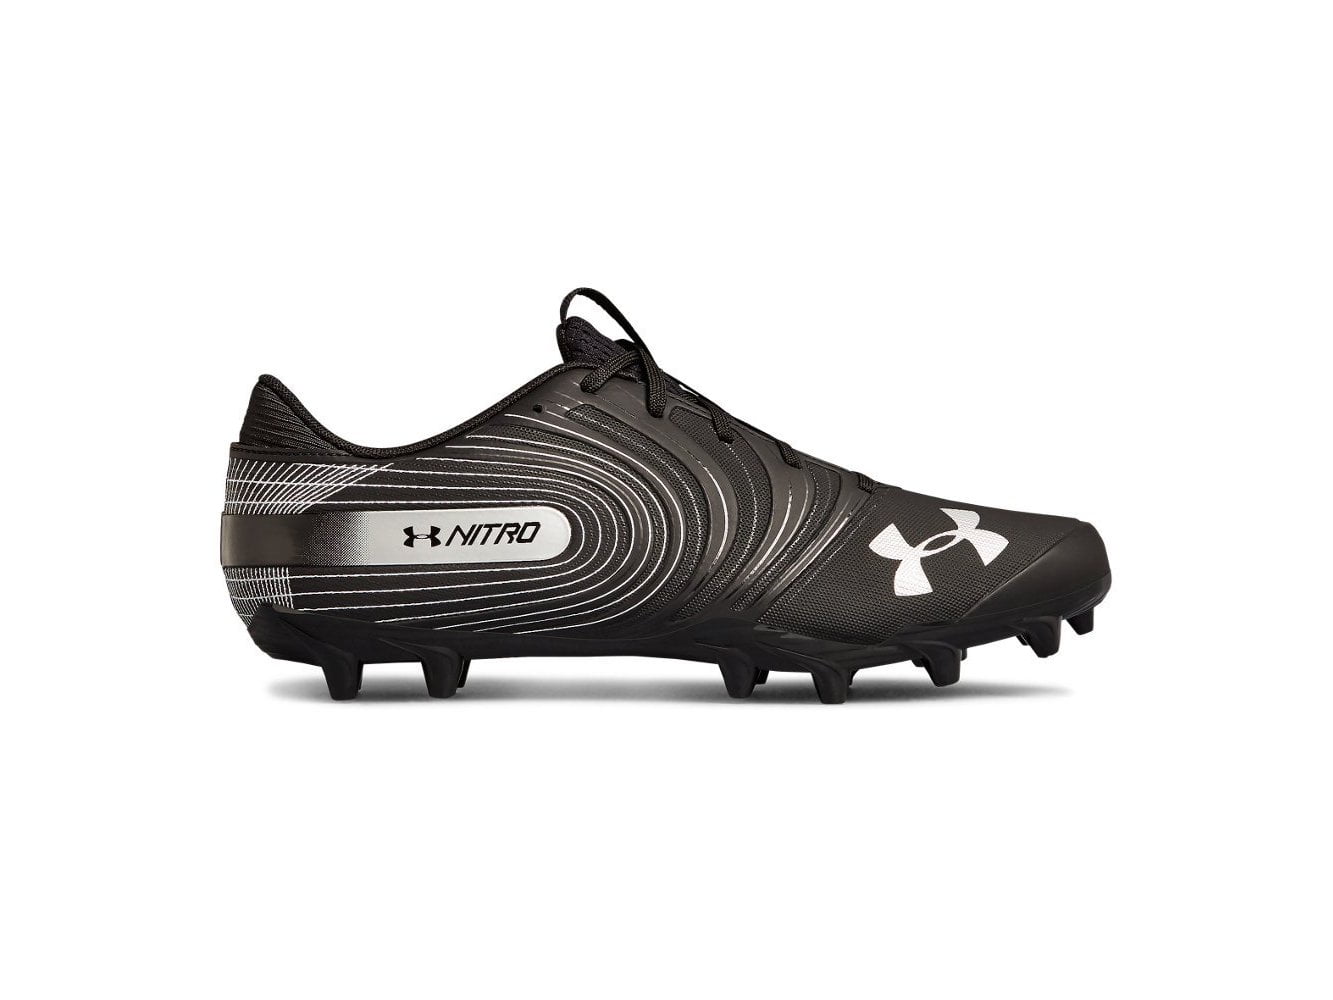 Details about   Mens Under Armour Nitro Low MC Football Cleats Black 3000182-001 New 